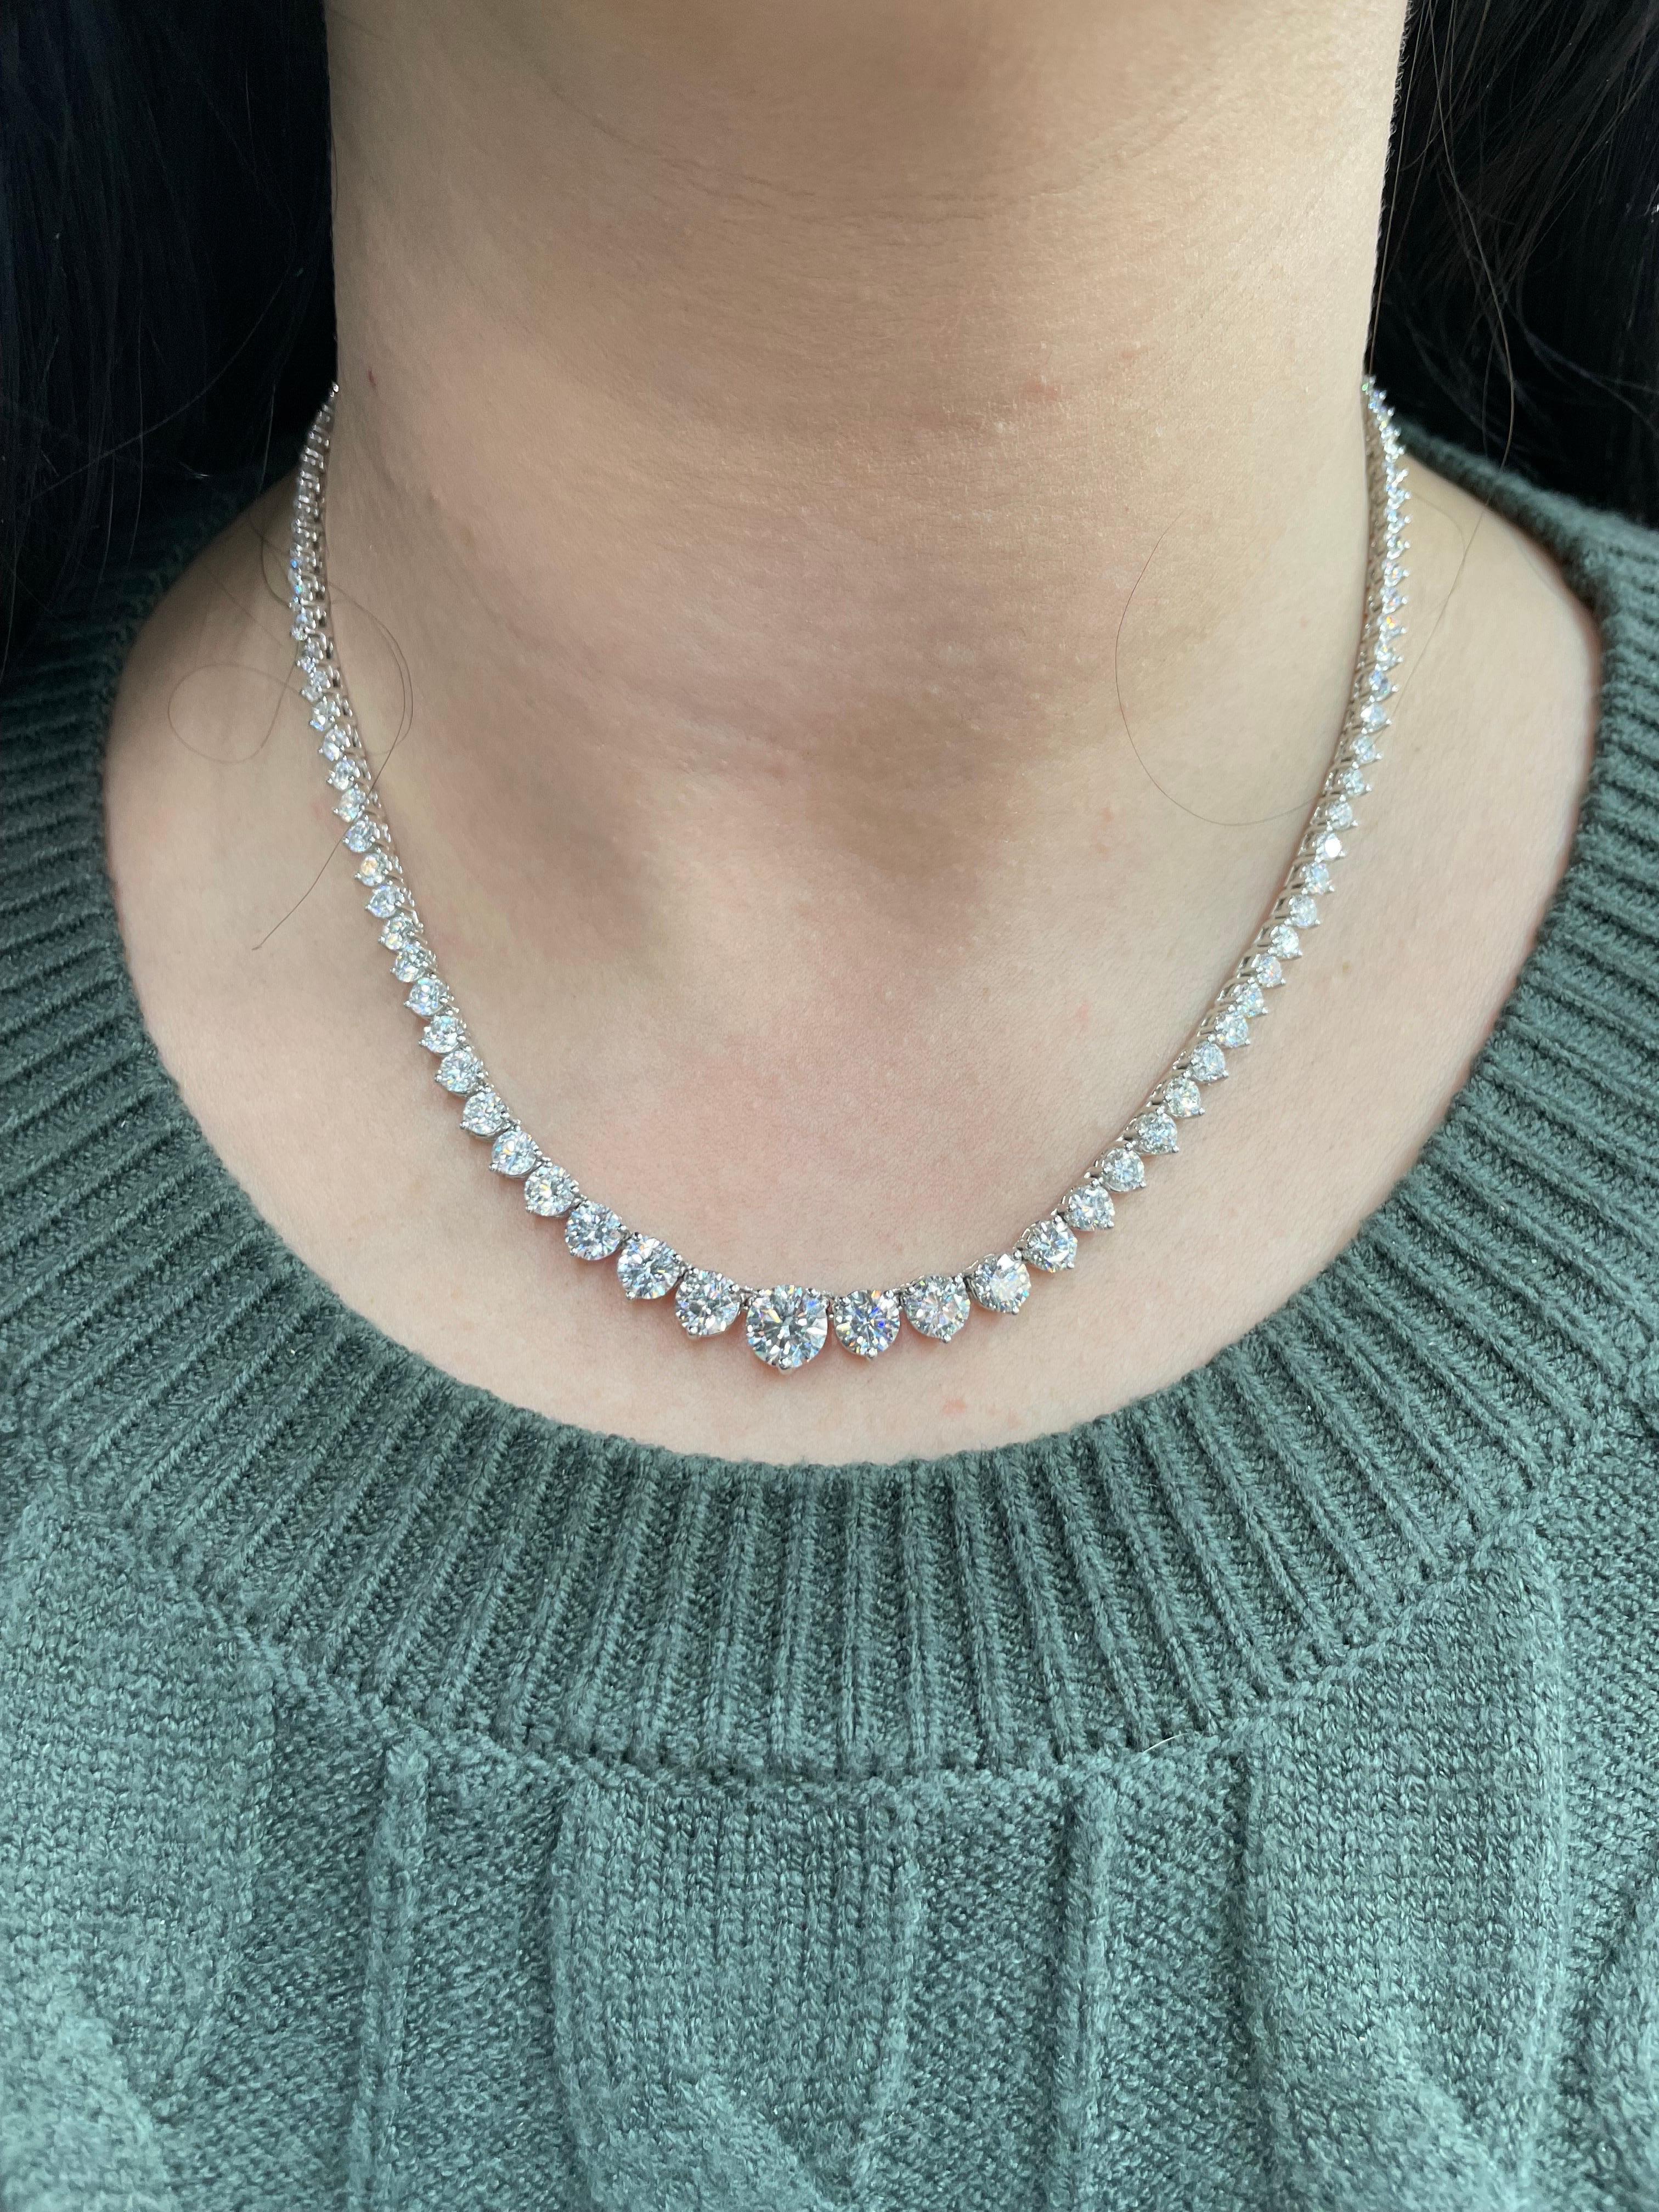 GIA Certified Diamond Riviere necklace featuring 109 Round Brilliants weighing 17 Carats, in a 3 prong 14 Karat White Gold.
Center Diamond 1.51 Carats GIA G SI2
Two Side Diamonds 0.72 Points GIA H SI2 & 0.66 Points GIA H SI2
Color G-H
Clarity